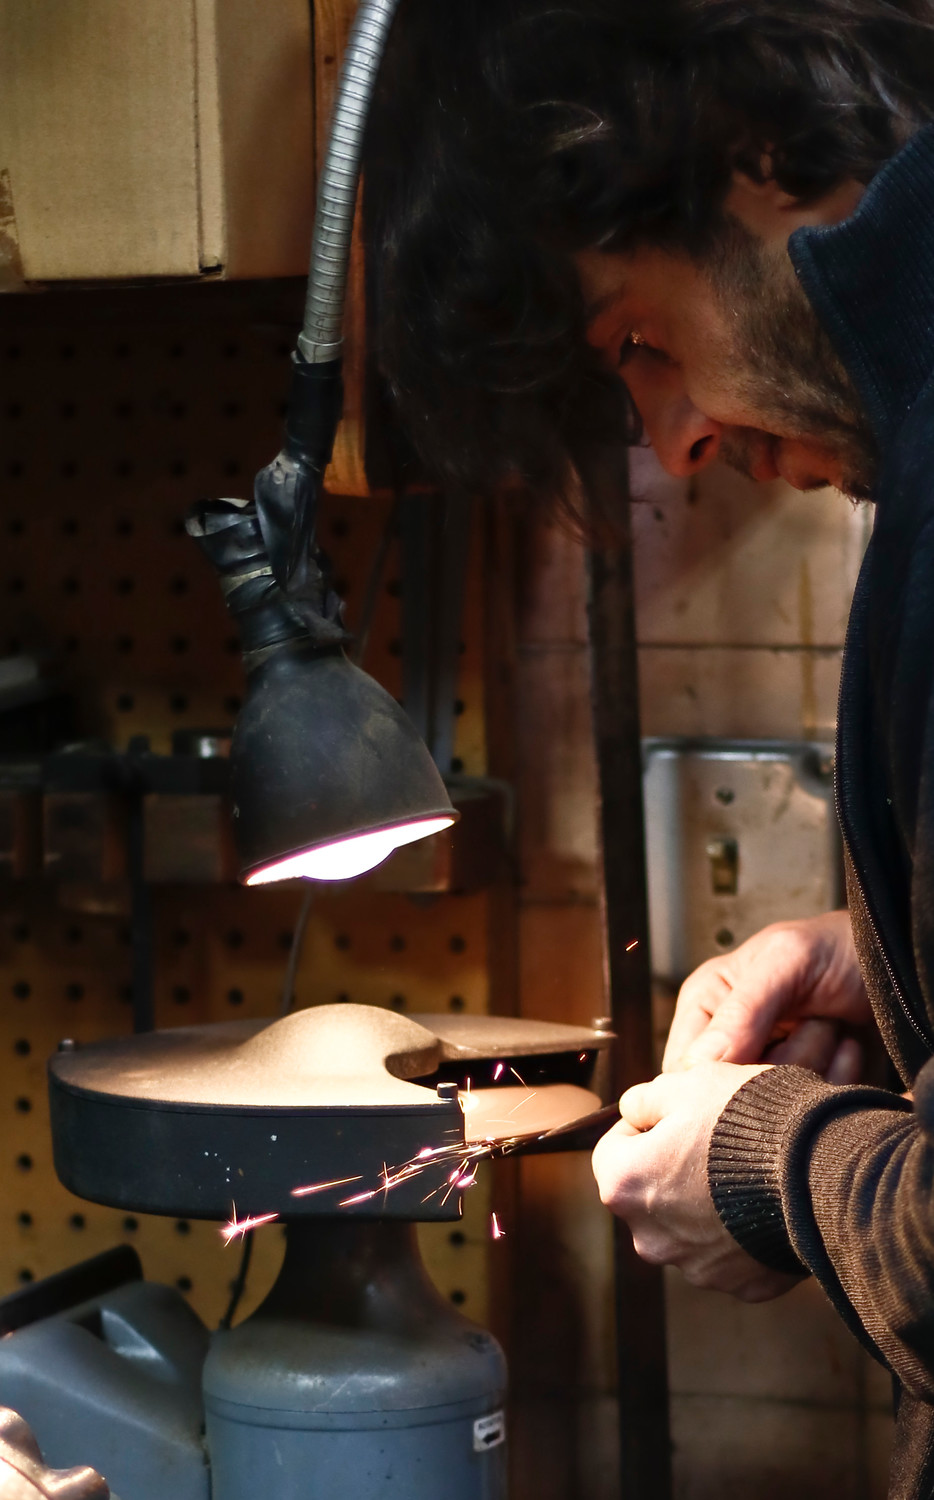 Simone Diana hones the chisel he is using to carve the edges of a new bass.